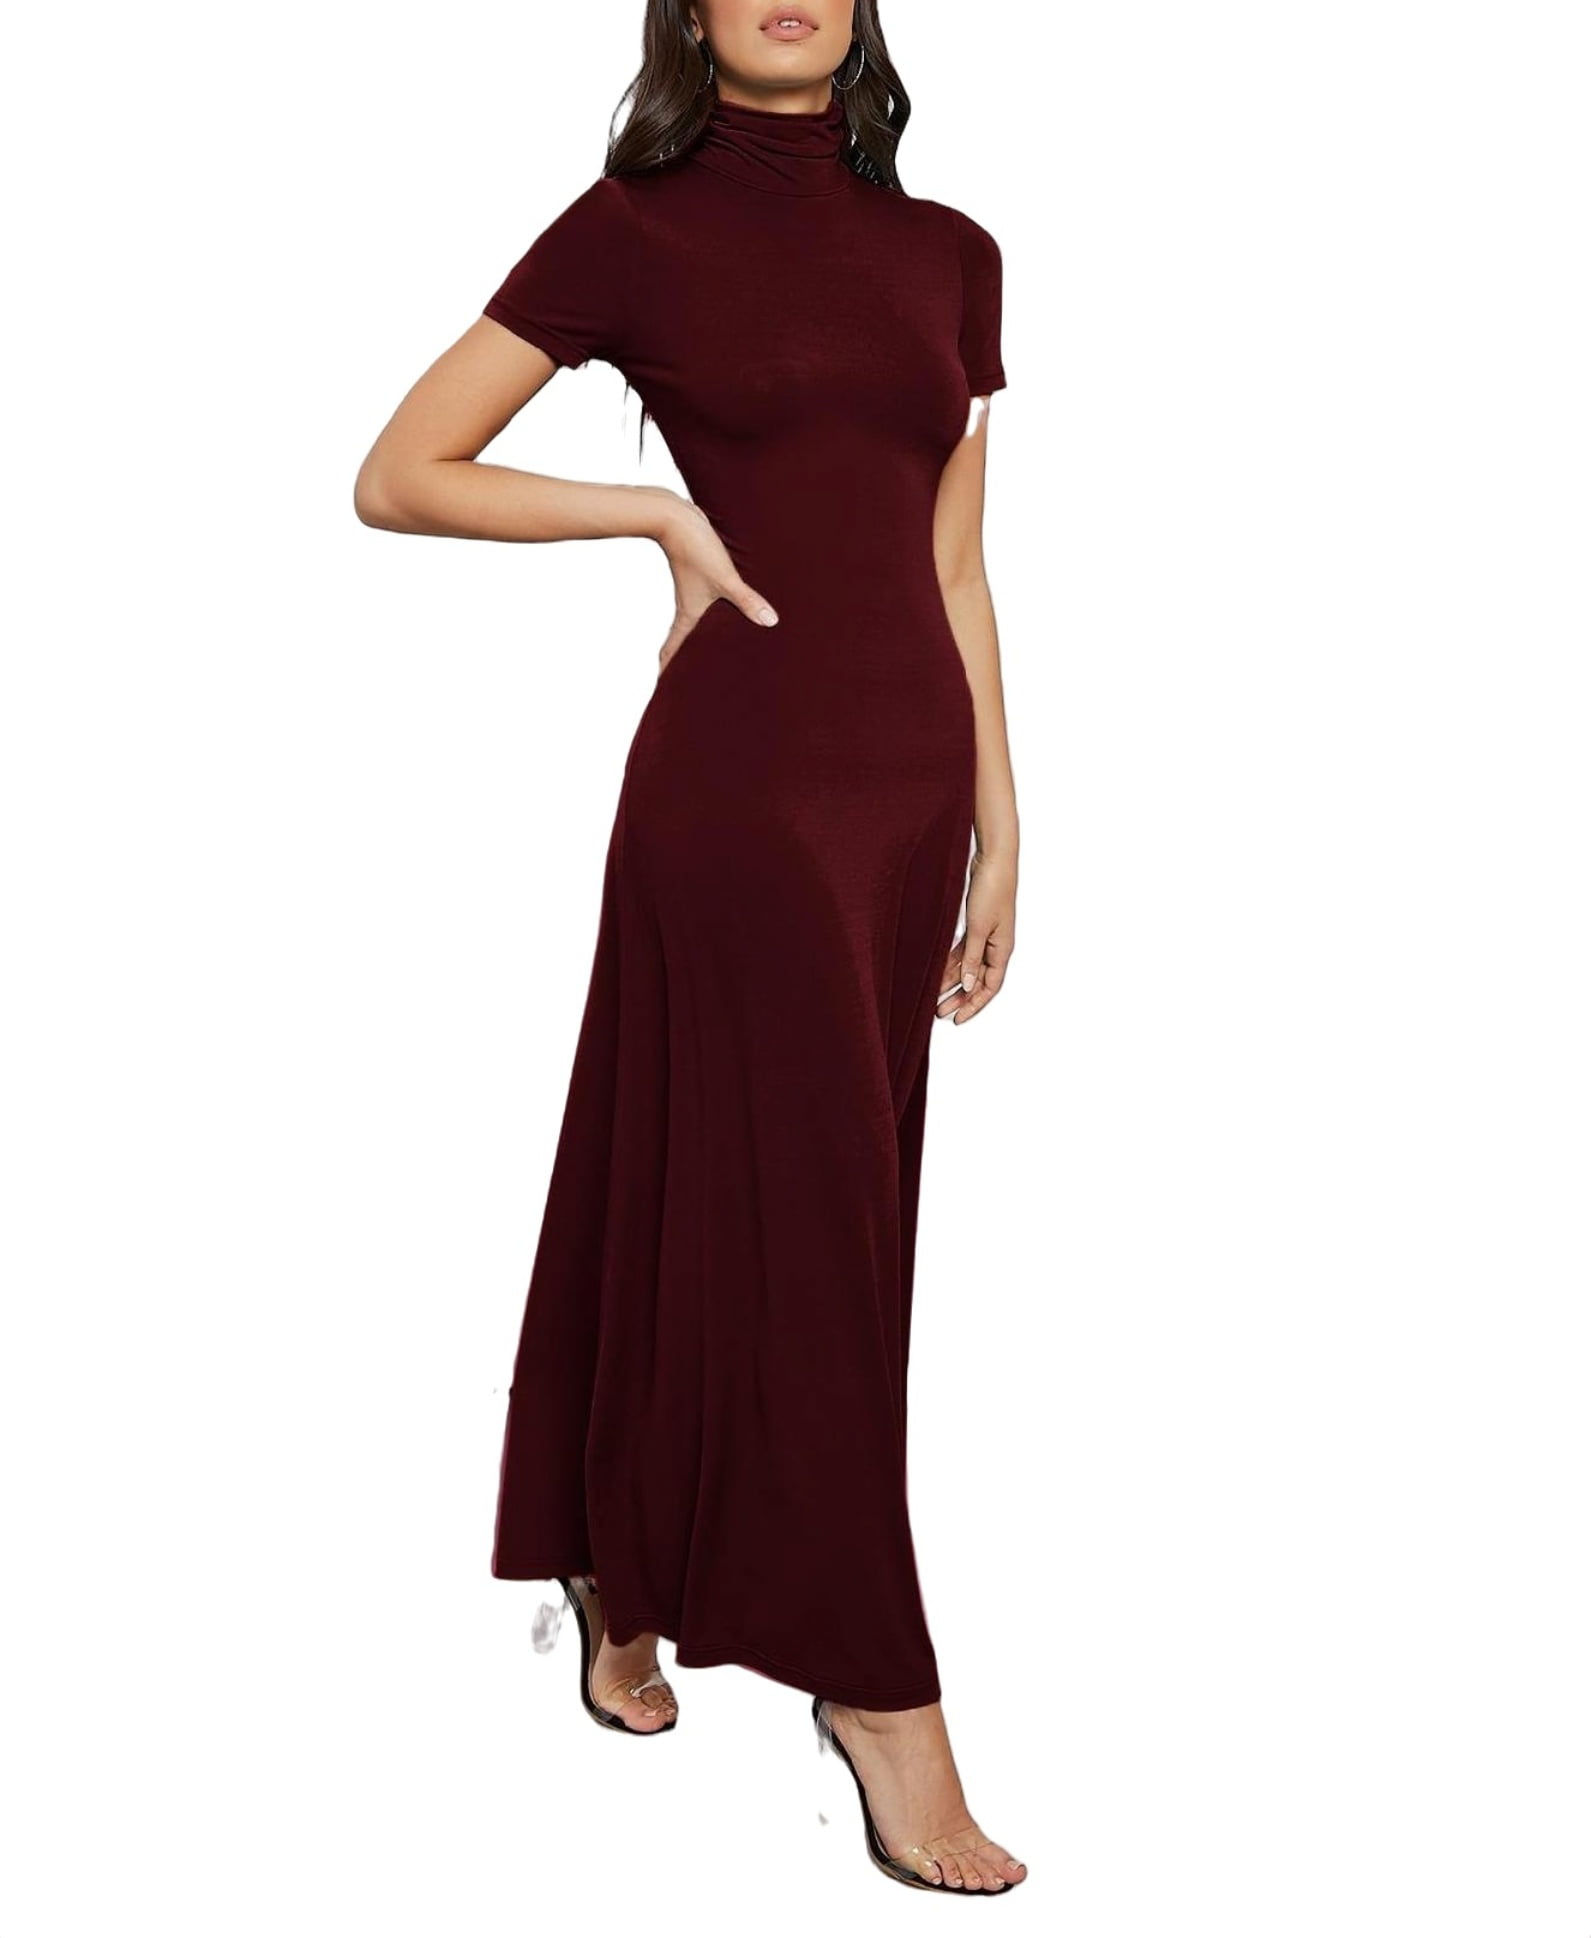 Buy RK CREATION Plain gown (Maroon, Free size) at Amazon.in